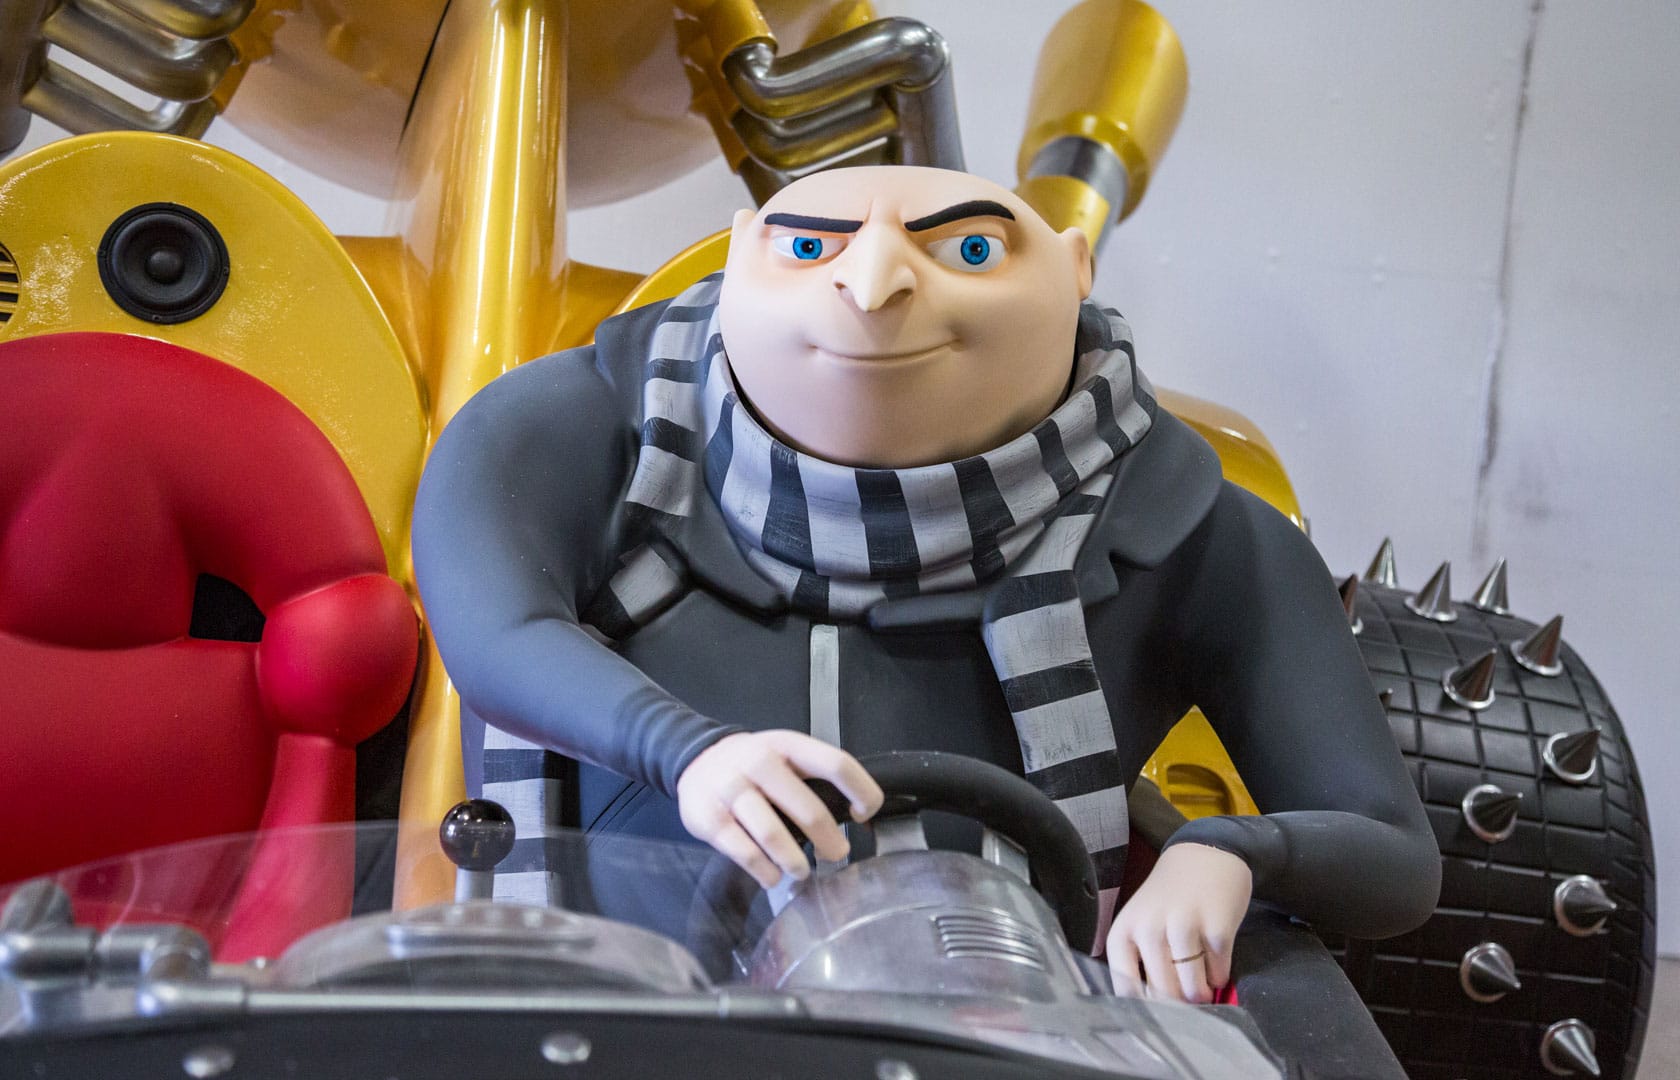 Despicable Me Characters – 60 Grit Studios